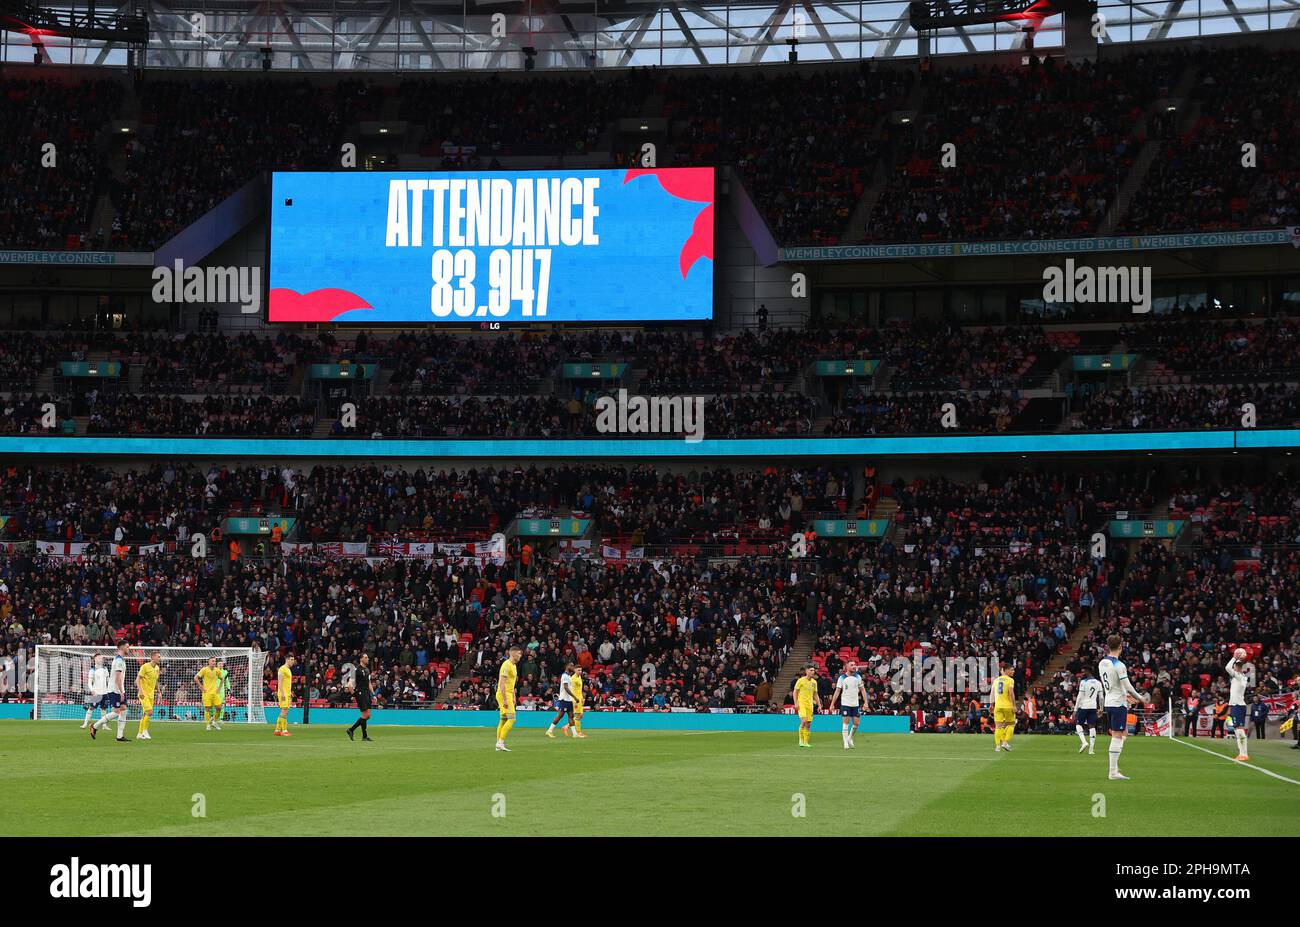 Attendance Of 86,047 At Wembley During Uefa Euro 2024 Qualifier in Attendance Of March 2024